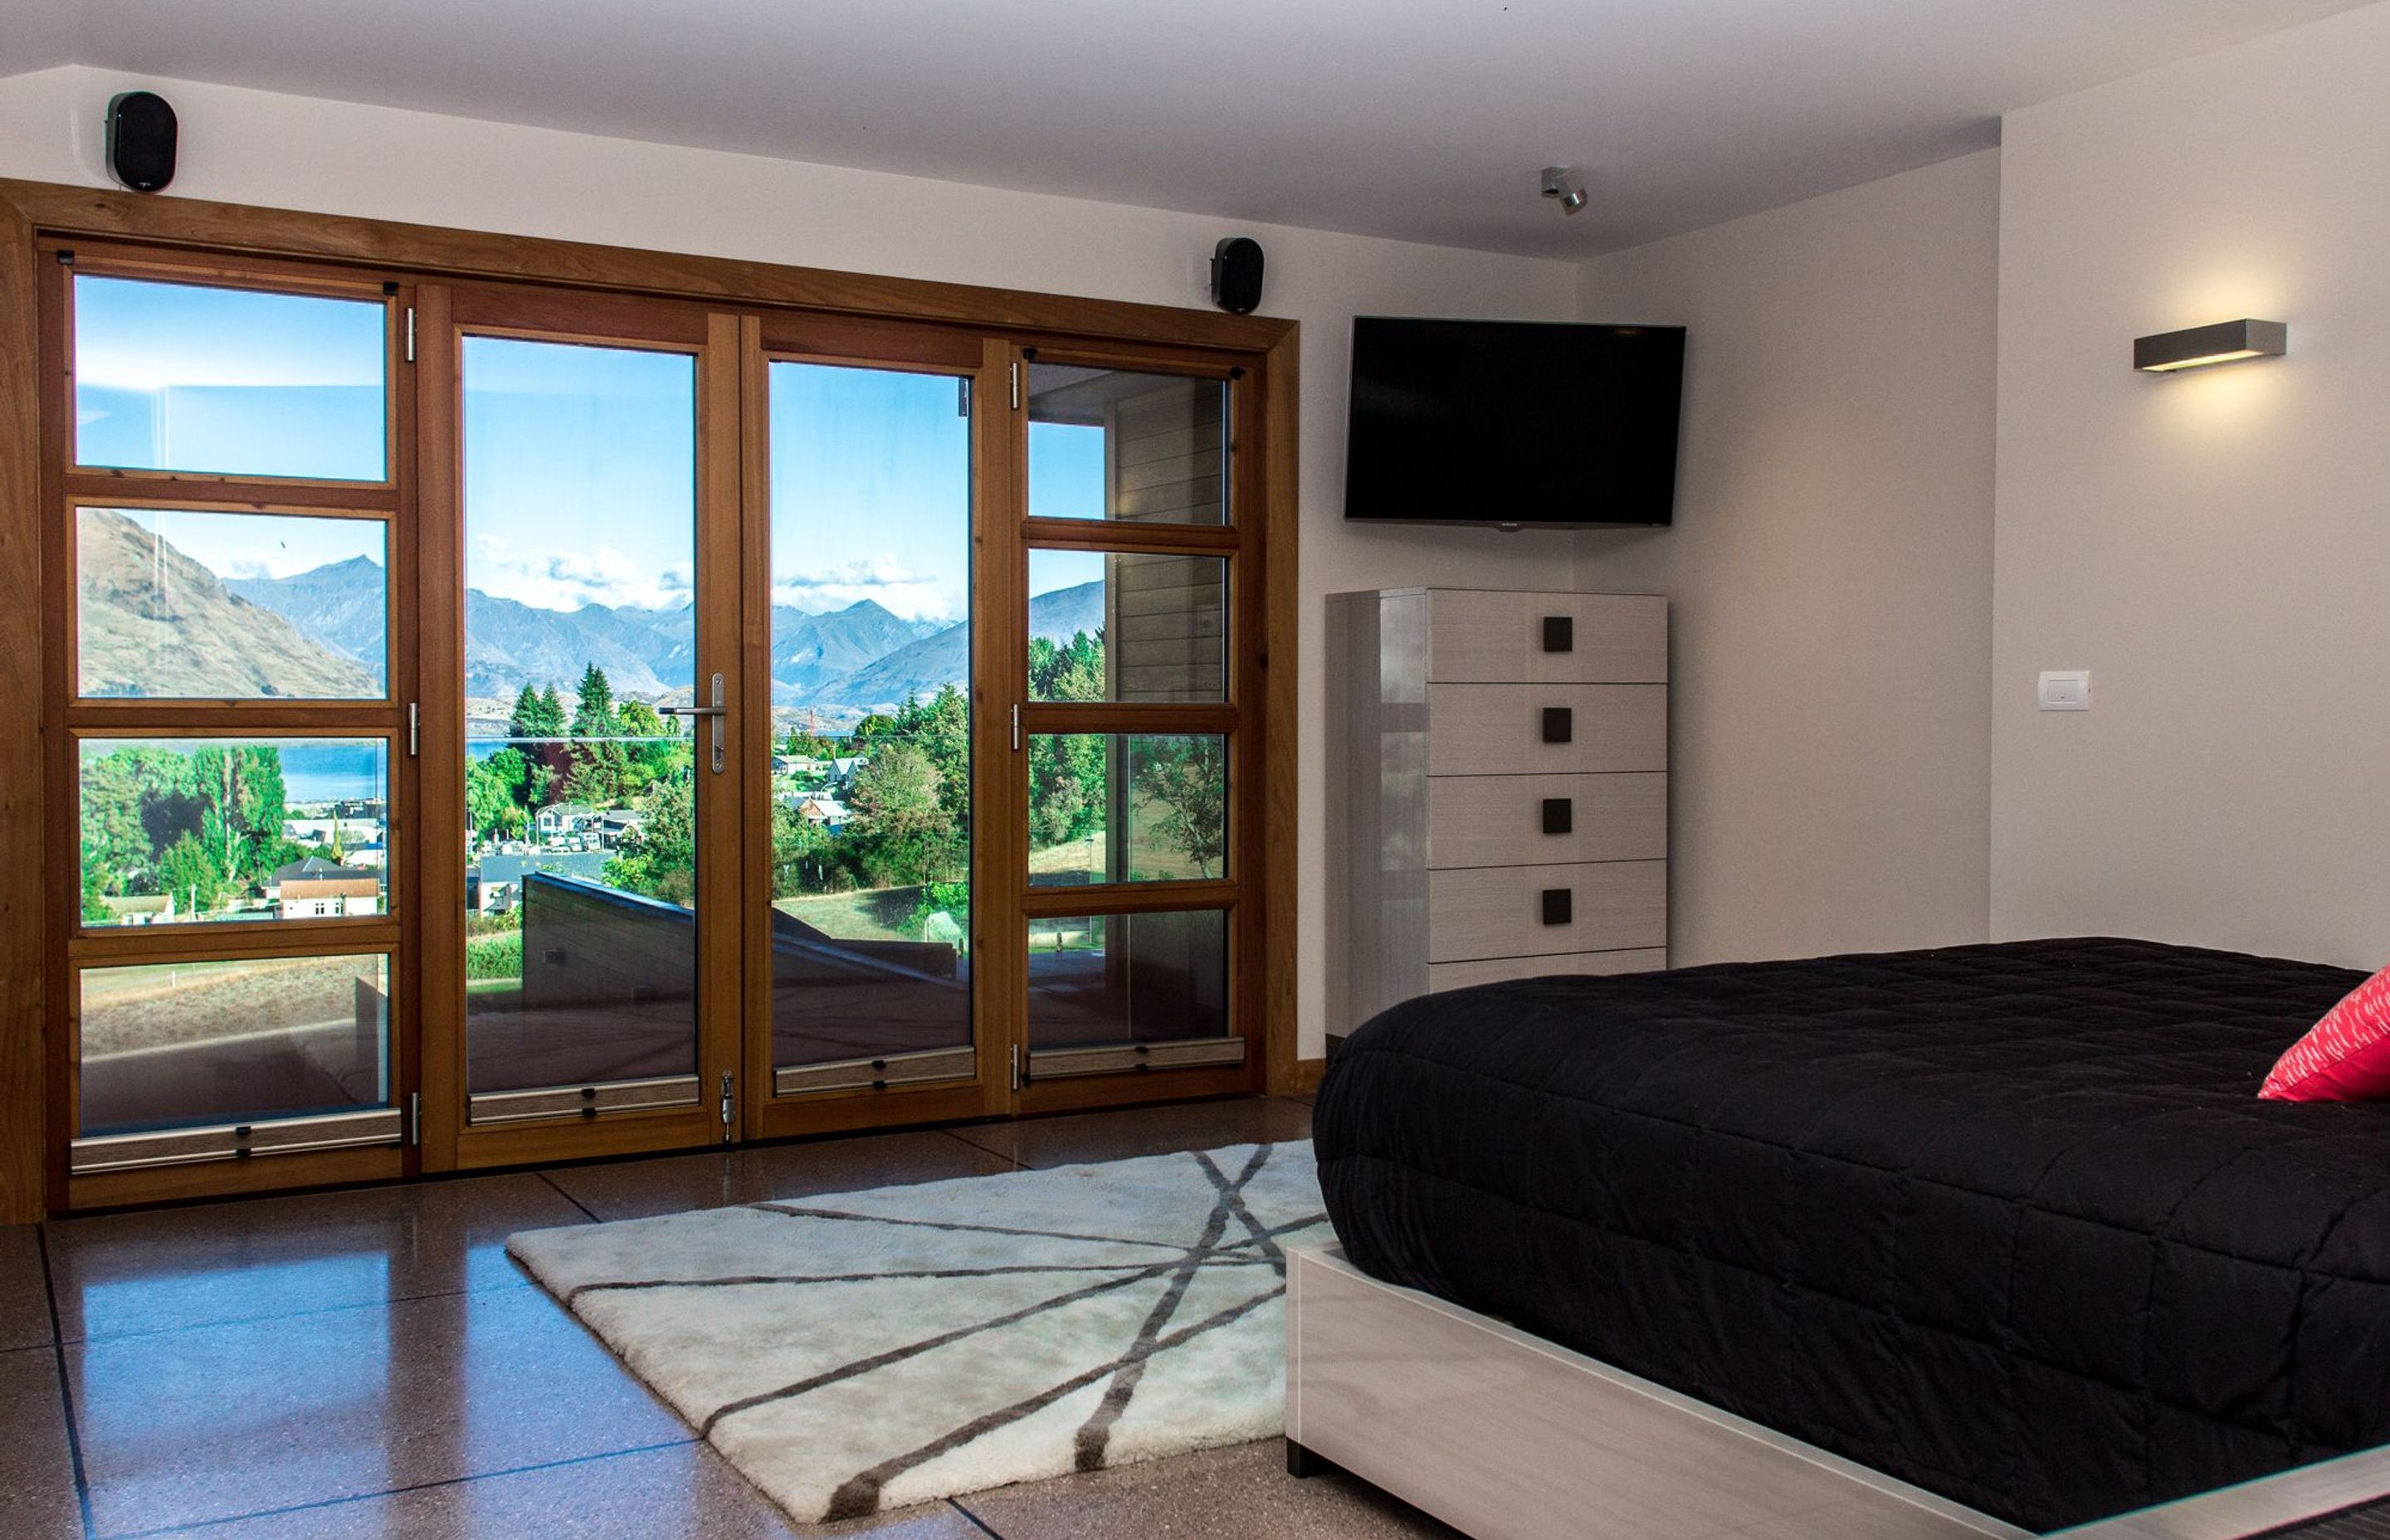 The view from the Master Bedroom, across Lake Wanaka to the mountains beyond.